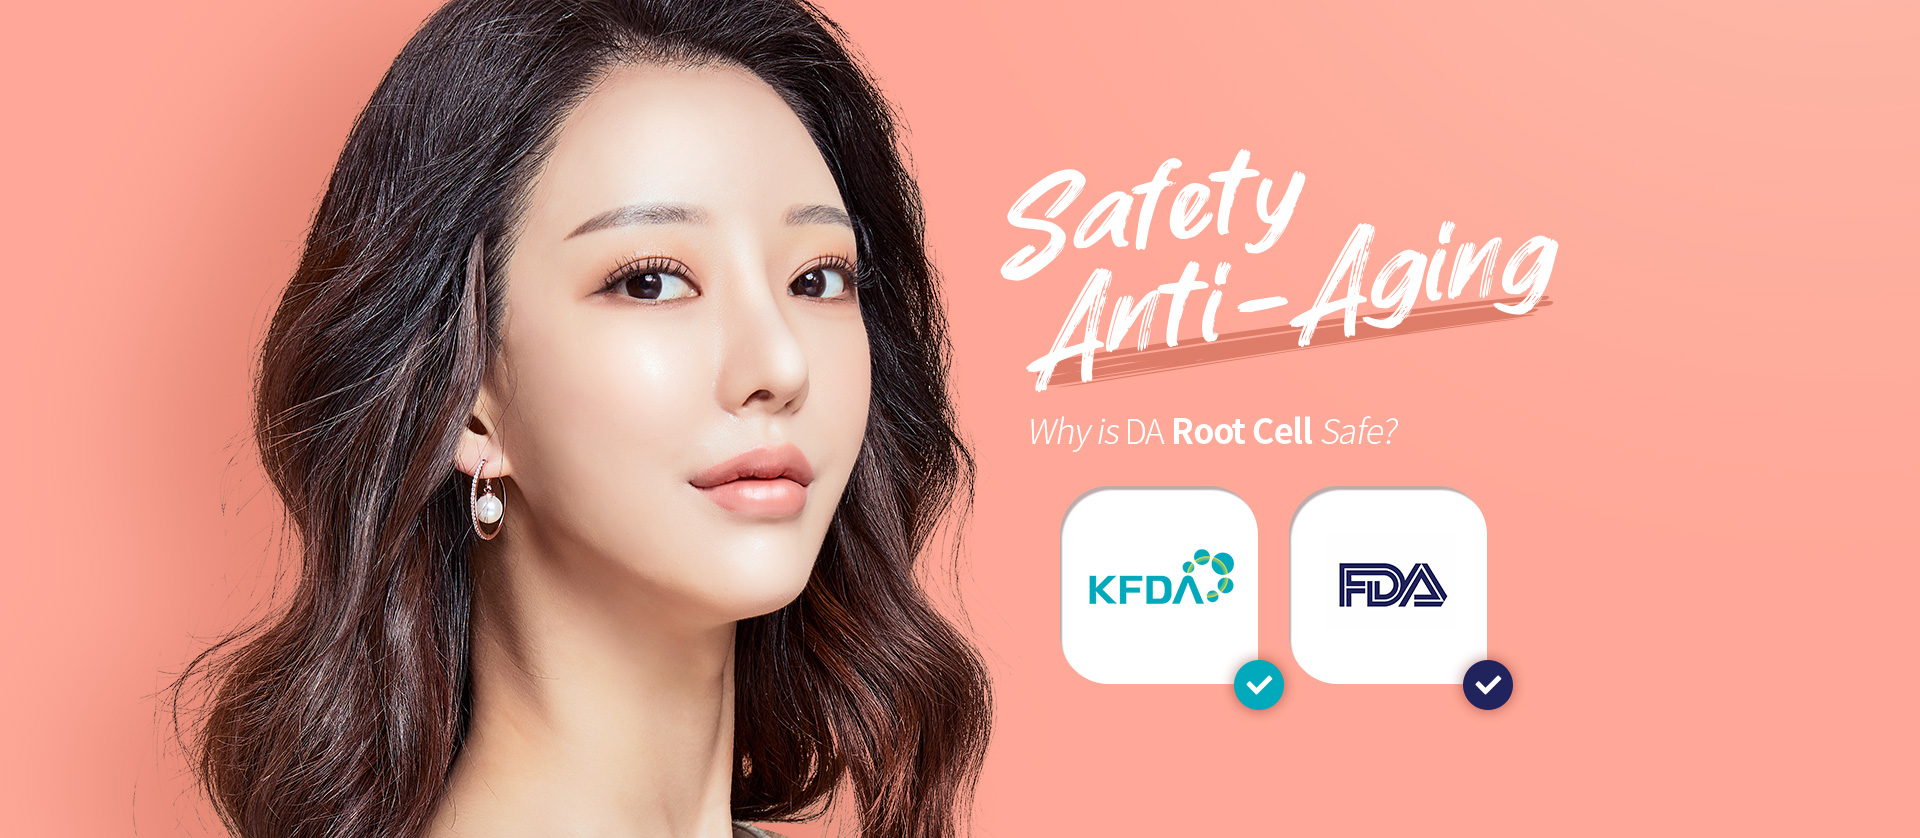 Safe Anti-aging why is da root cell safe?